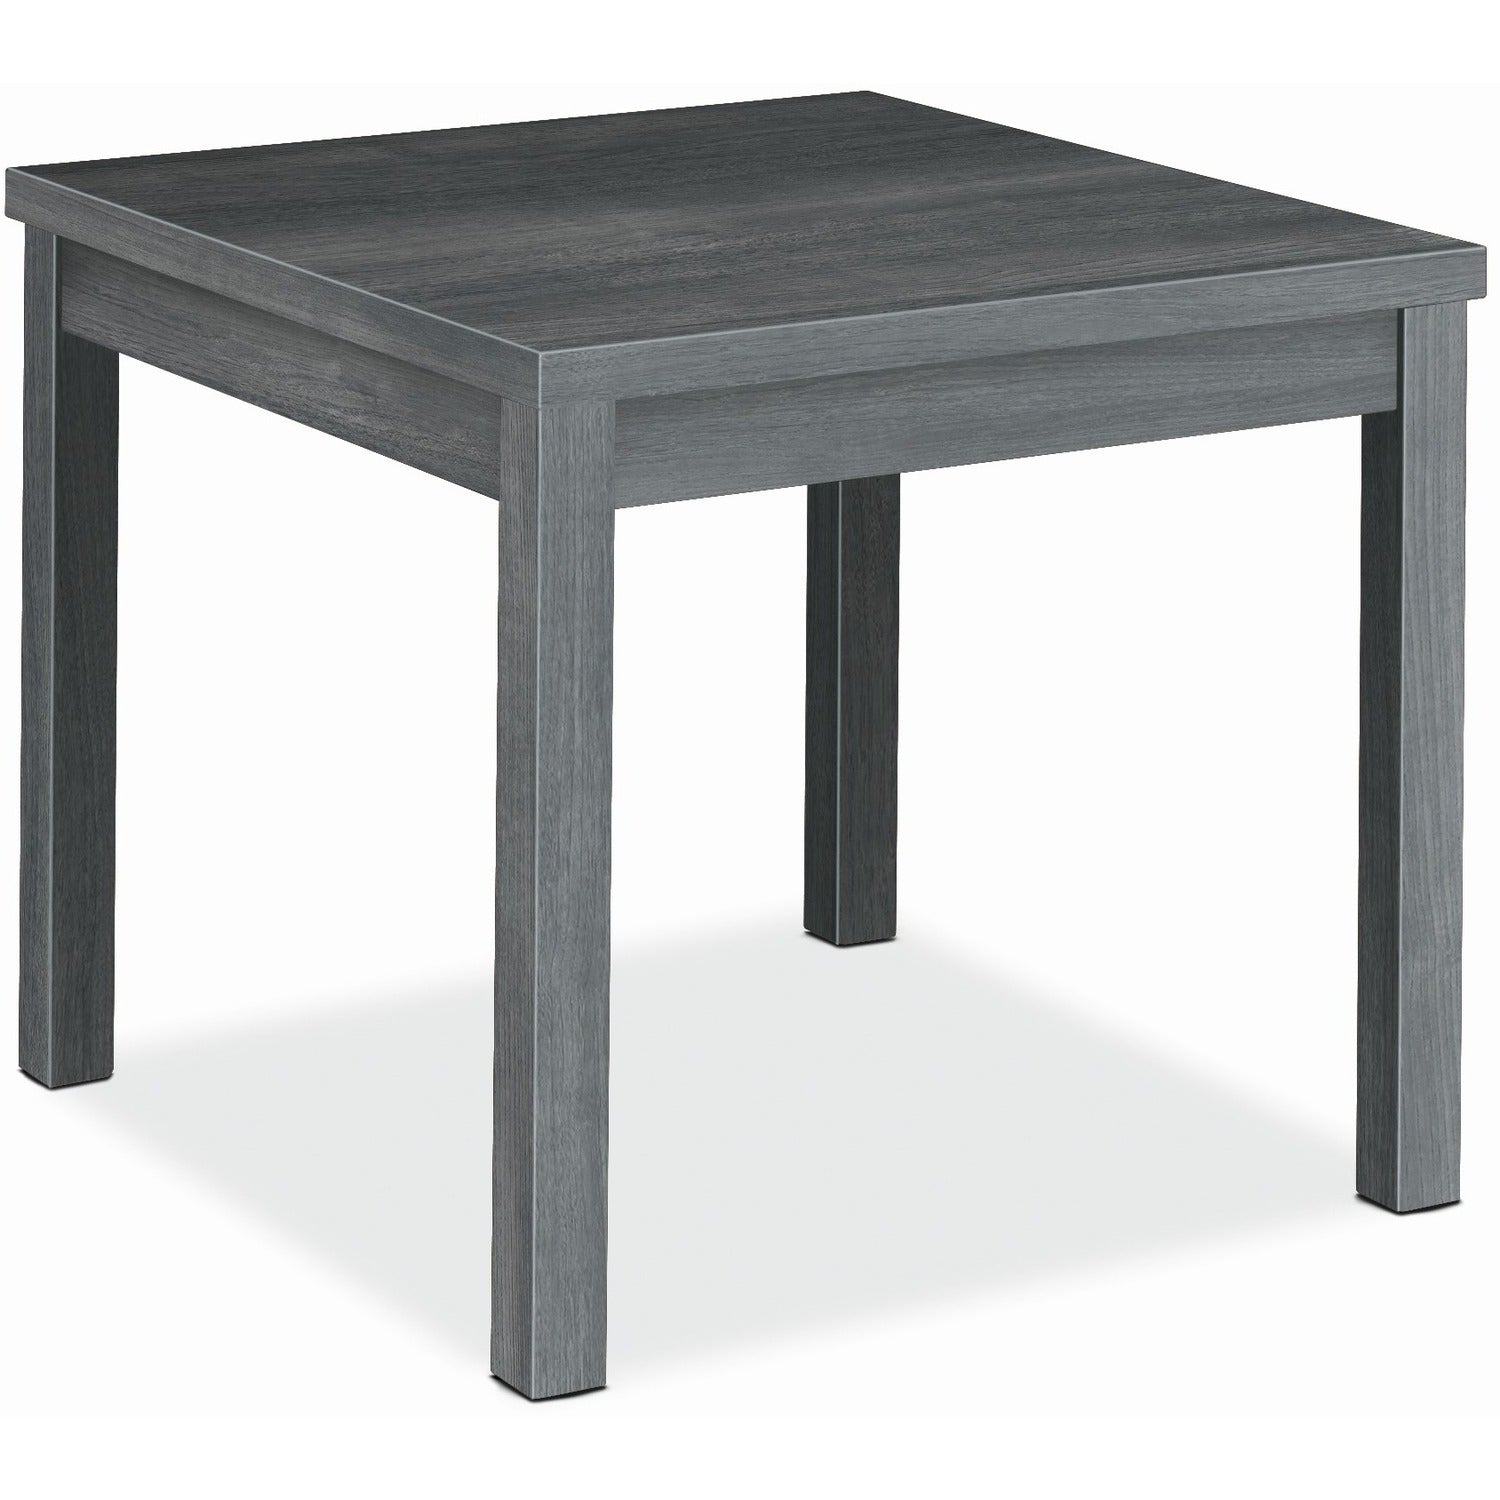 hon-h80192-corner-table-for-table-topsquare-top-20-height-x-24-width-x-24-depth-sterling-ash_hon80192ls1 - 1